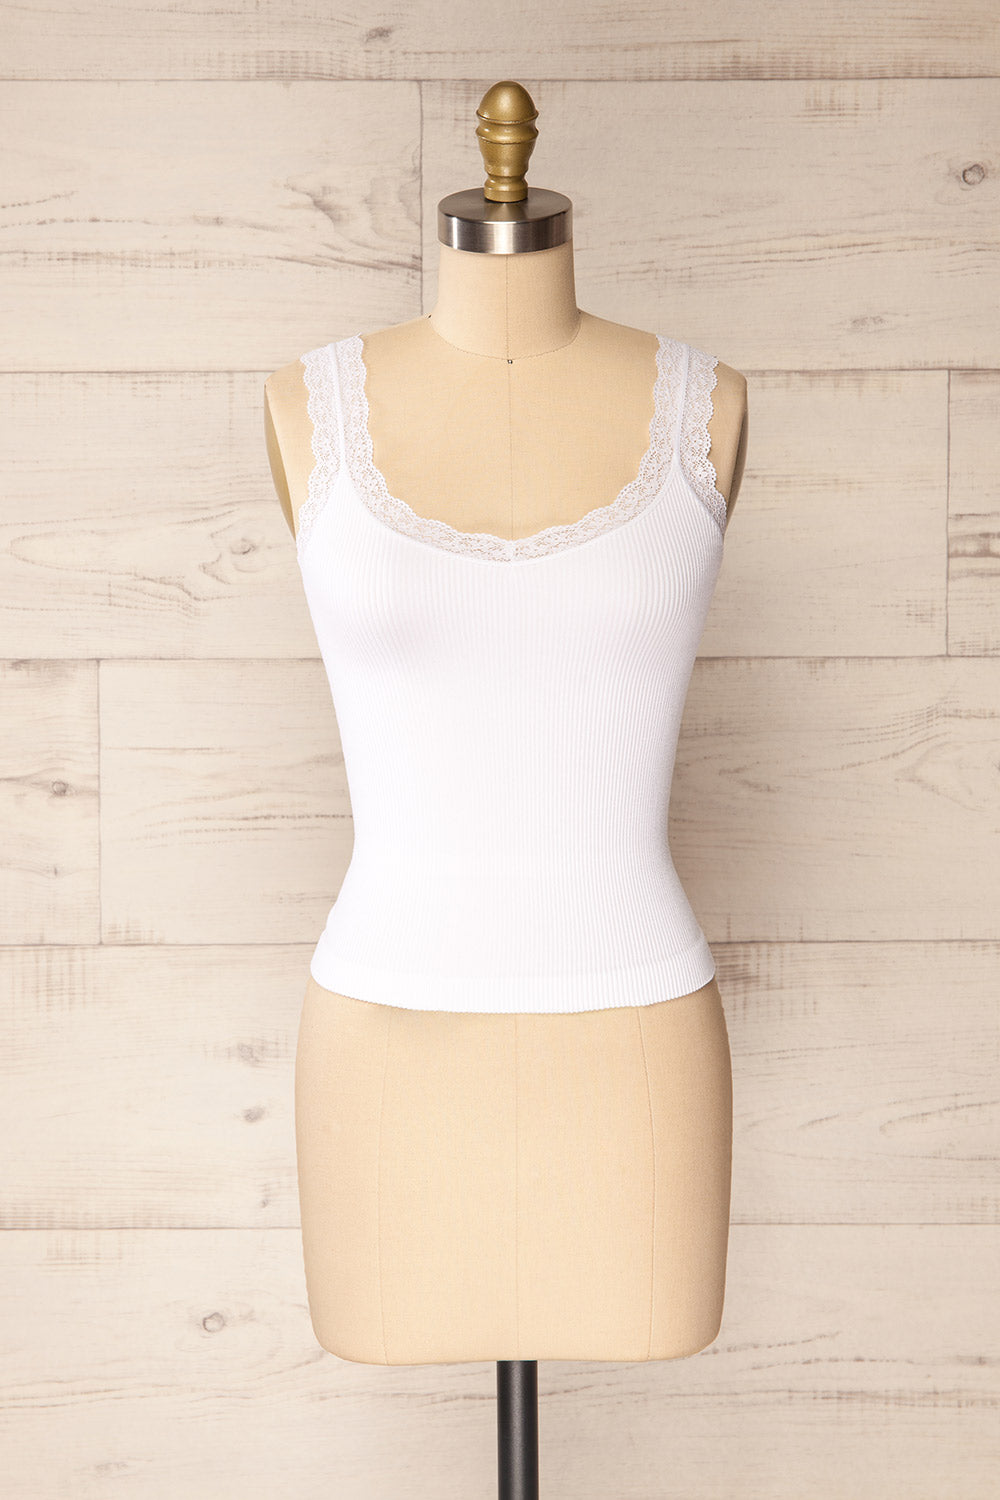 Somensac White Ribbed Camisole w/ Lace Trim | Boutique 1861 front view